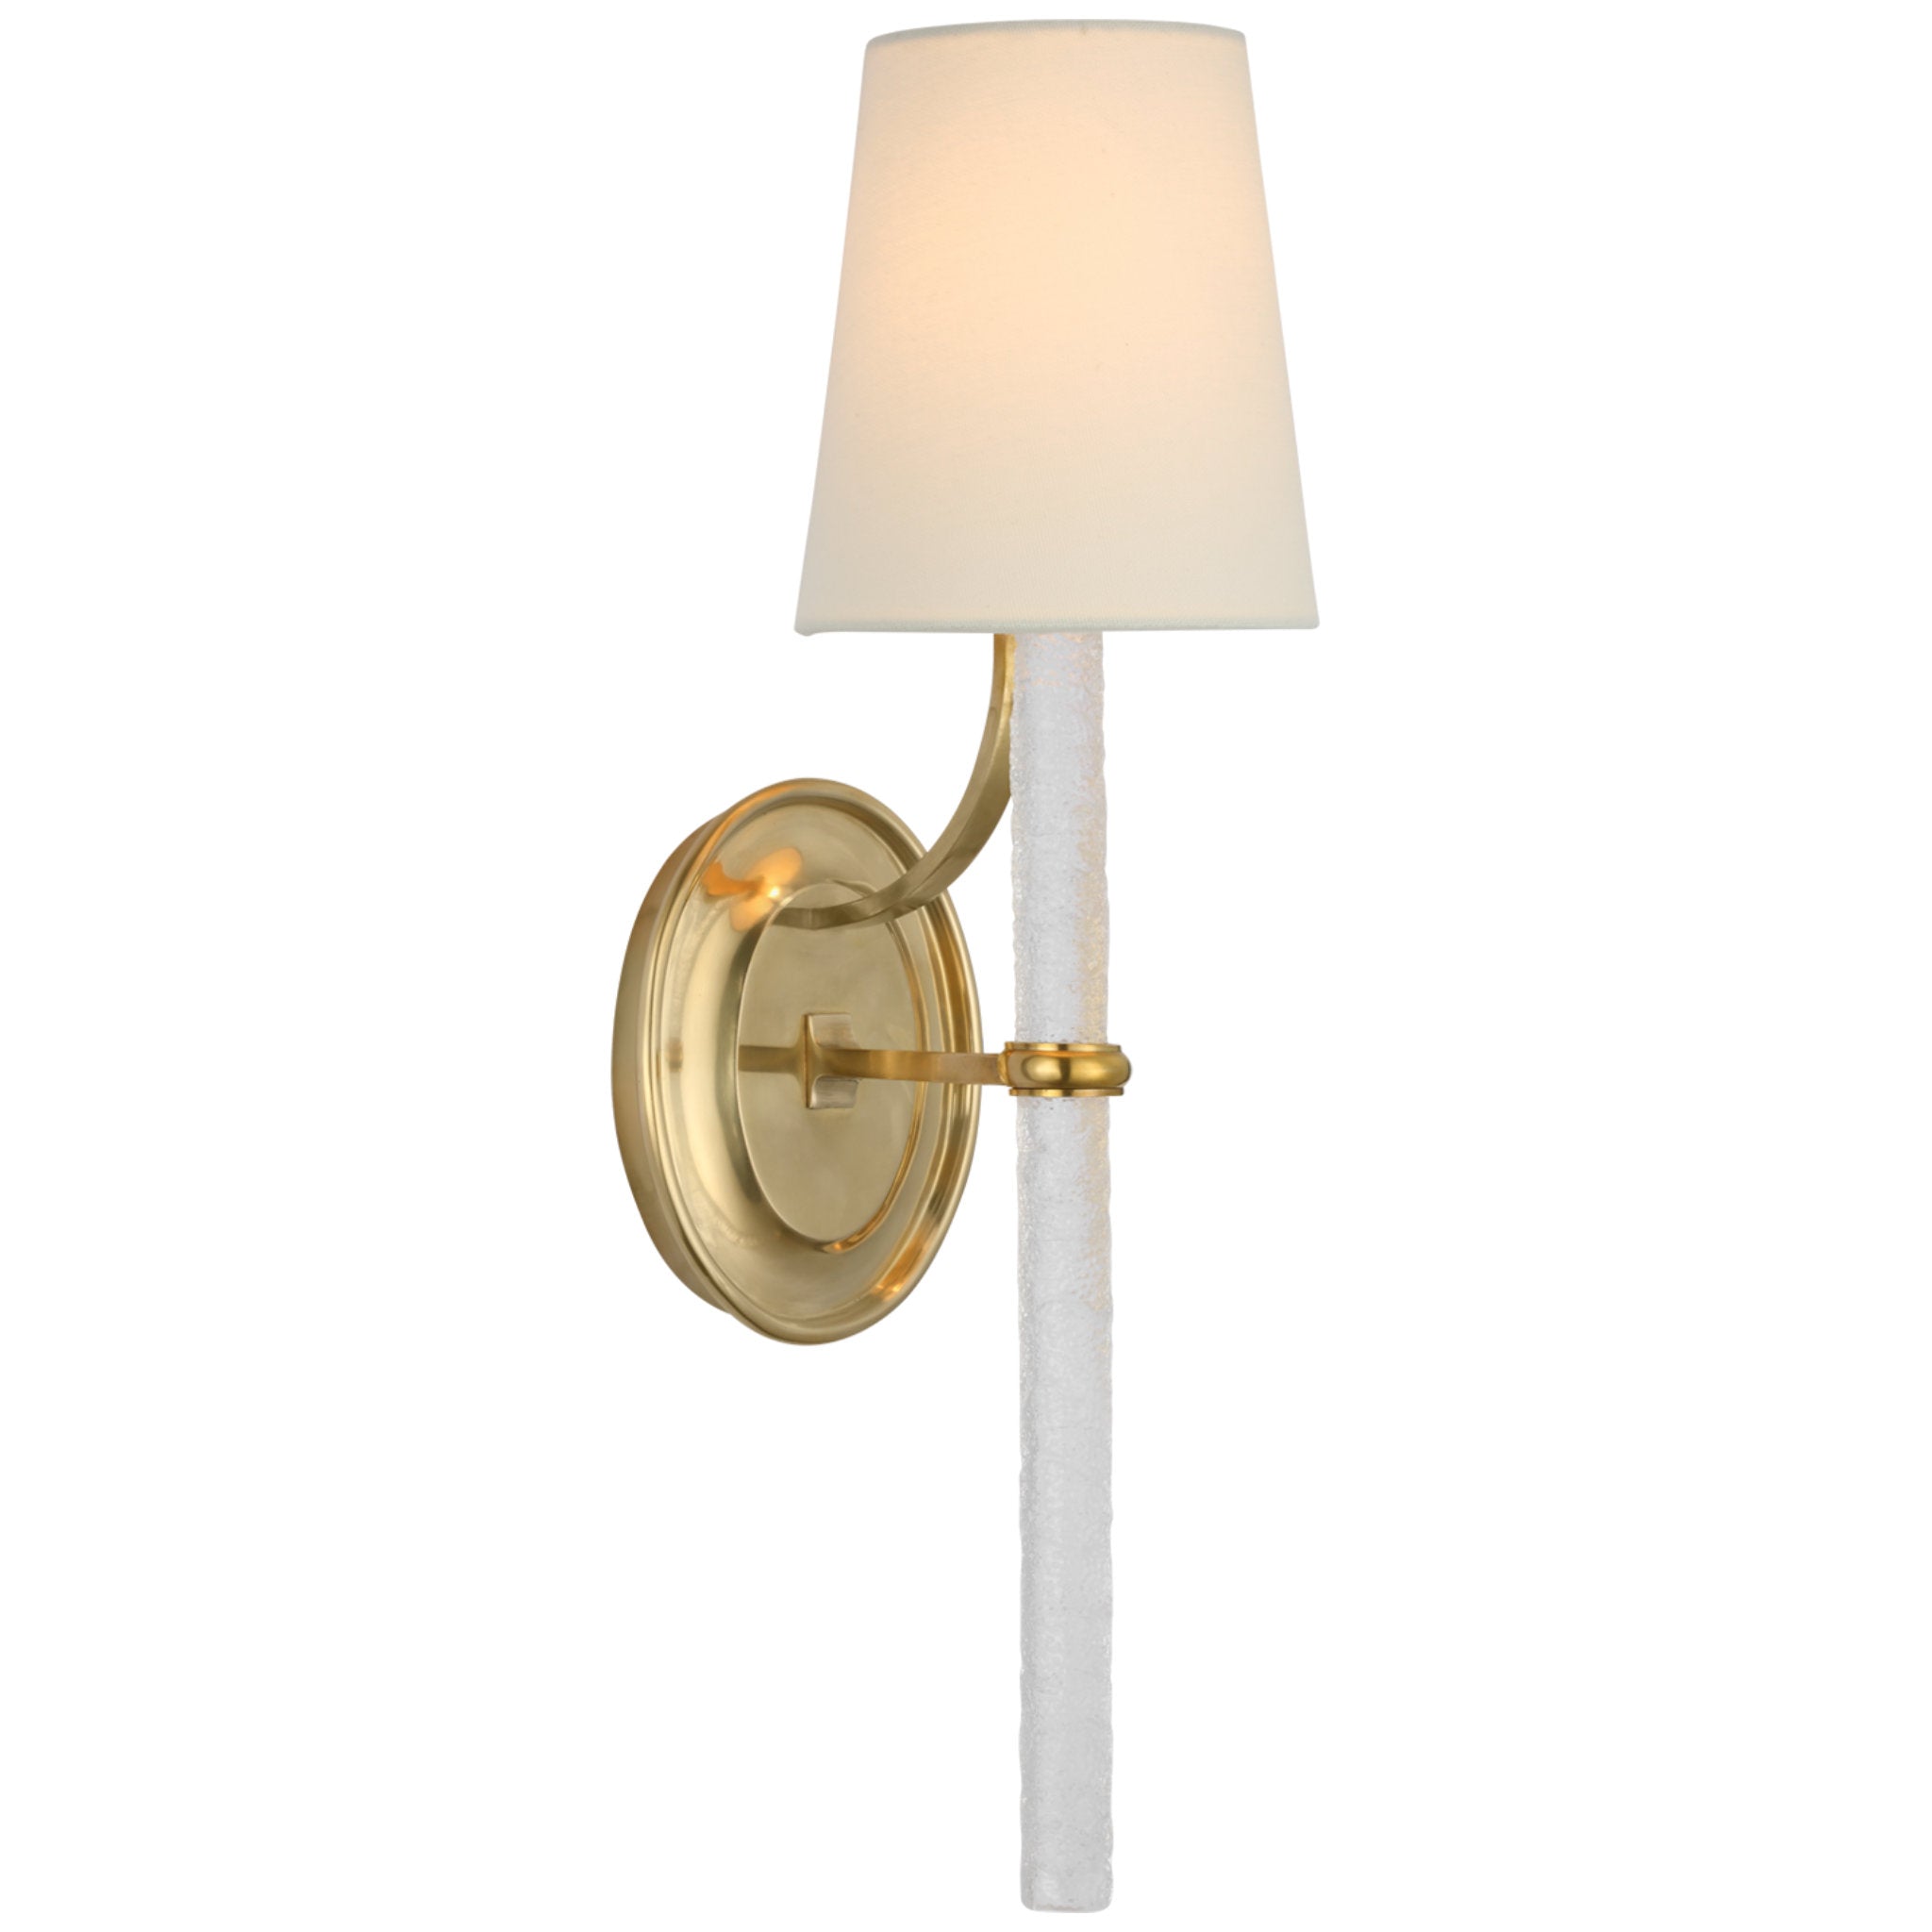 Marie Flanigan Abigail Large Sconce in Soft Brass and Clear Wavy Glass with Linen Shade